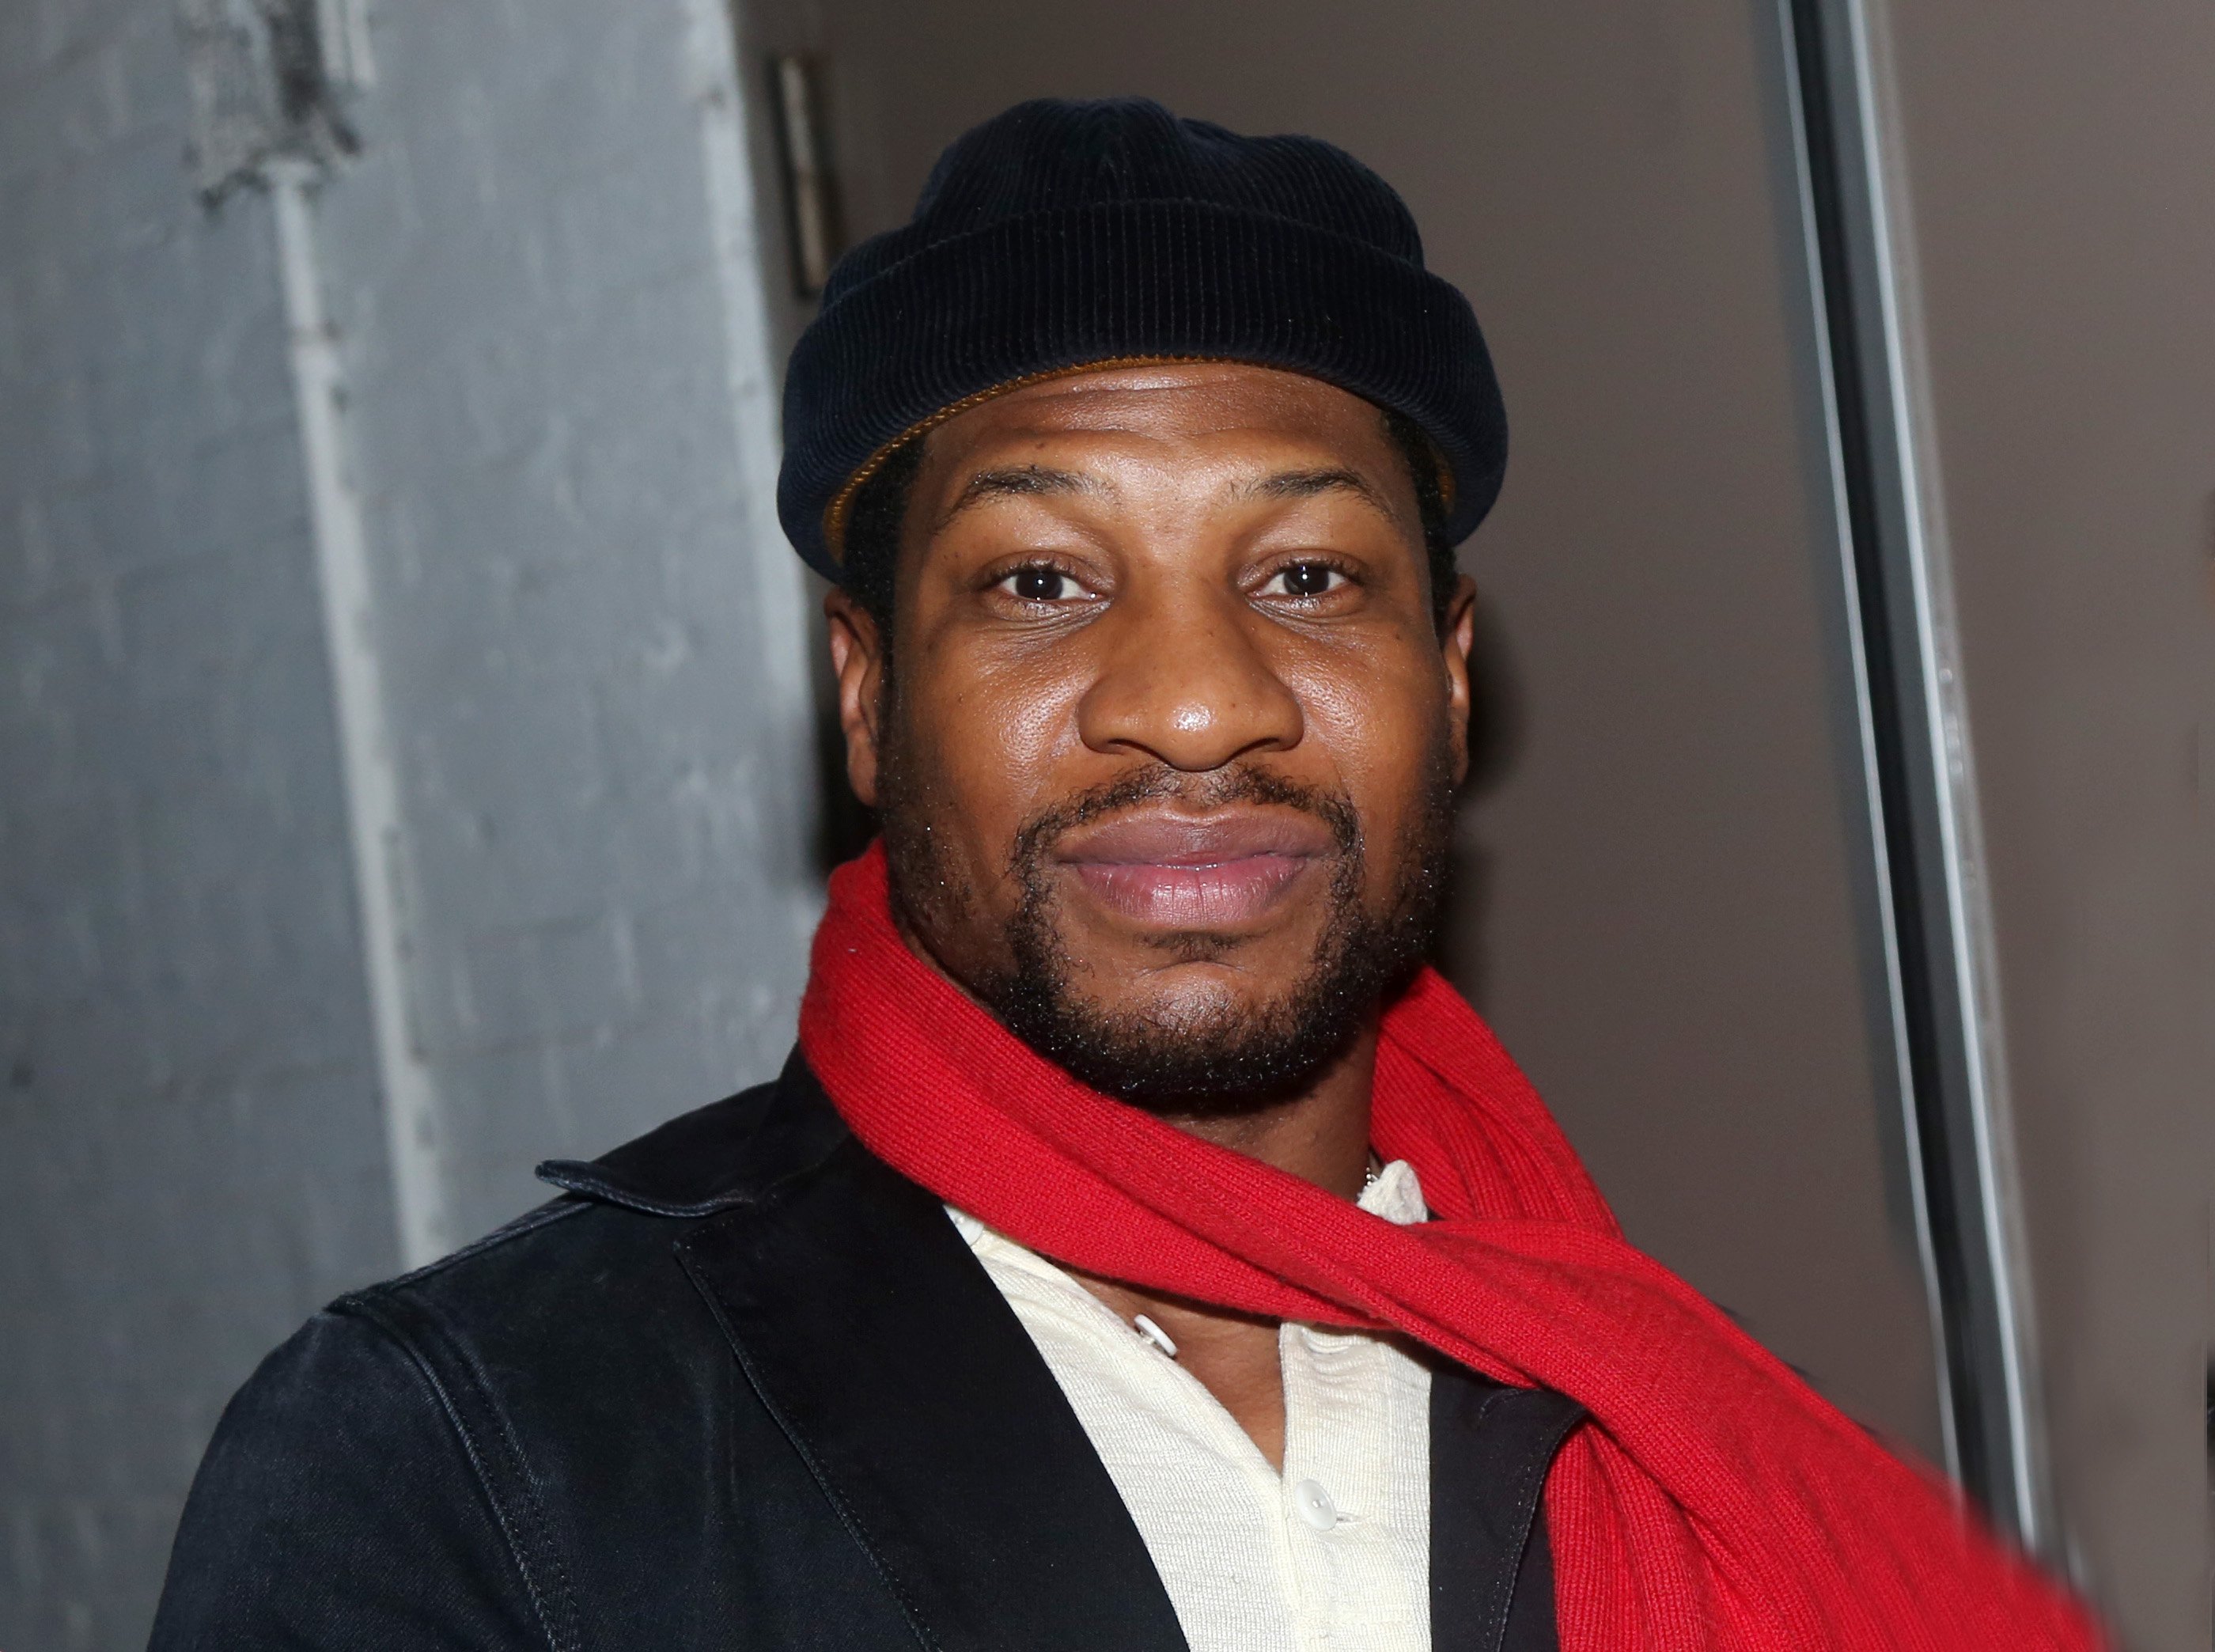 Jonathan Majors backstage at "The Piano Lesson" play on Broadway at The Barrymore Theater in New York City, New York, on December 8, 2022. | Source: Getty Images